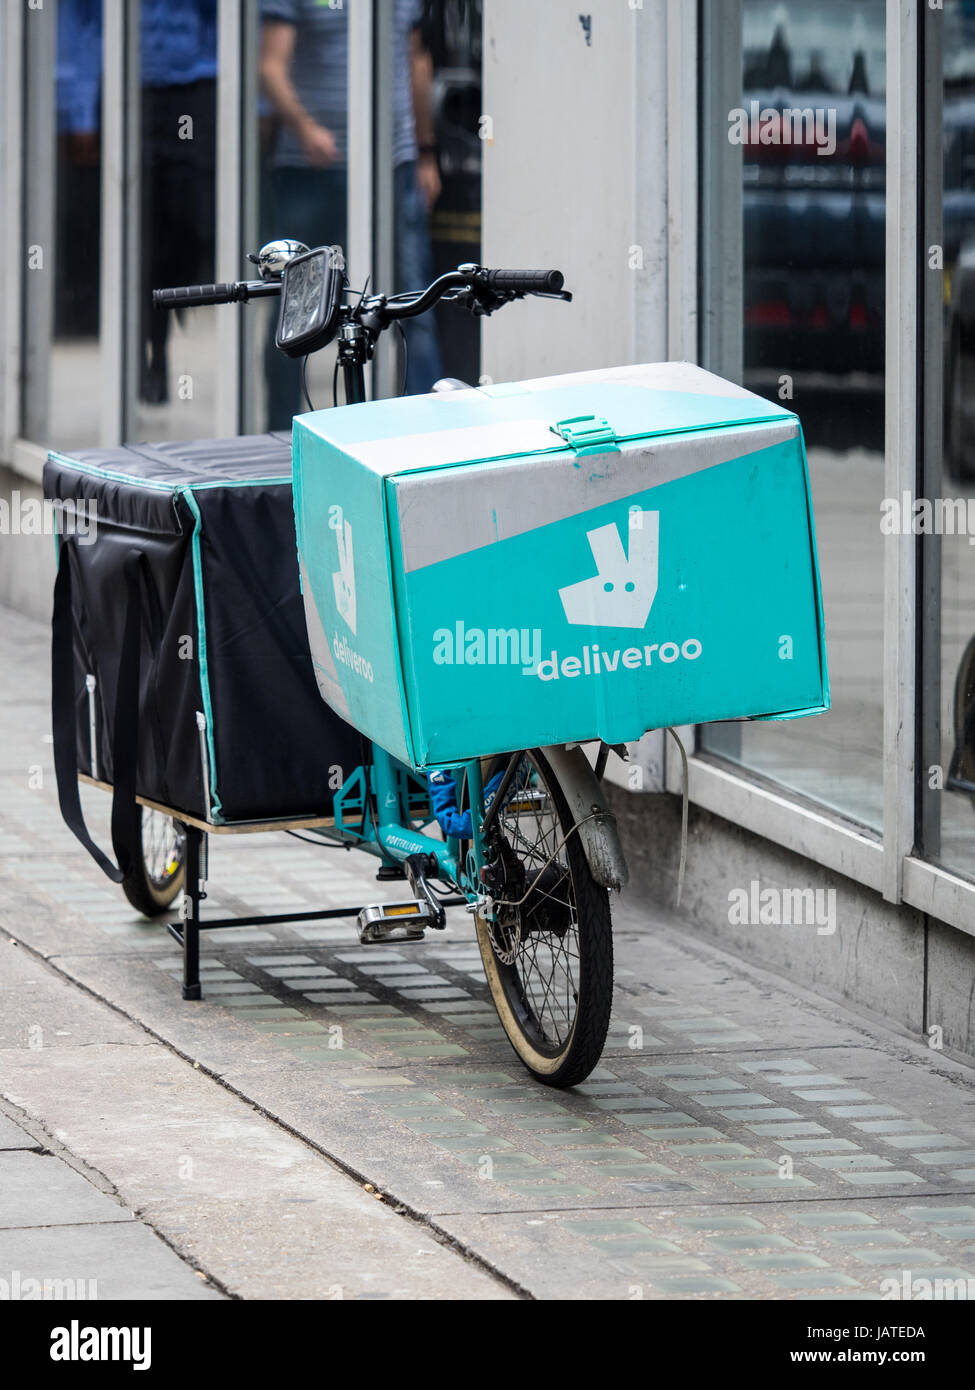 Deliveroo Food Delivery Cargo Bikes in London. Deliveroo is competing with Uber Eats in this fast growing market. Stock Photo